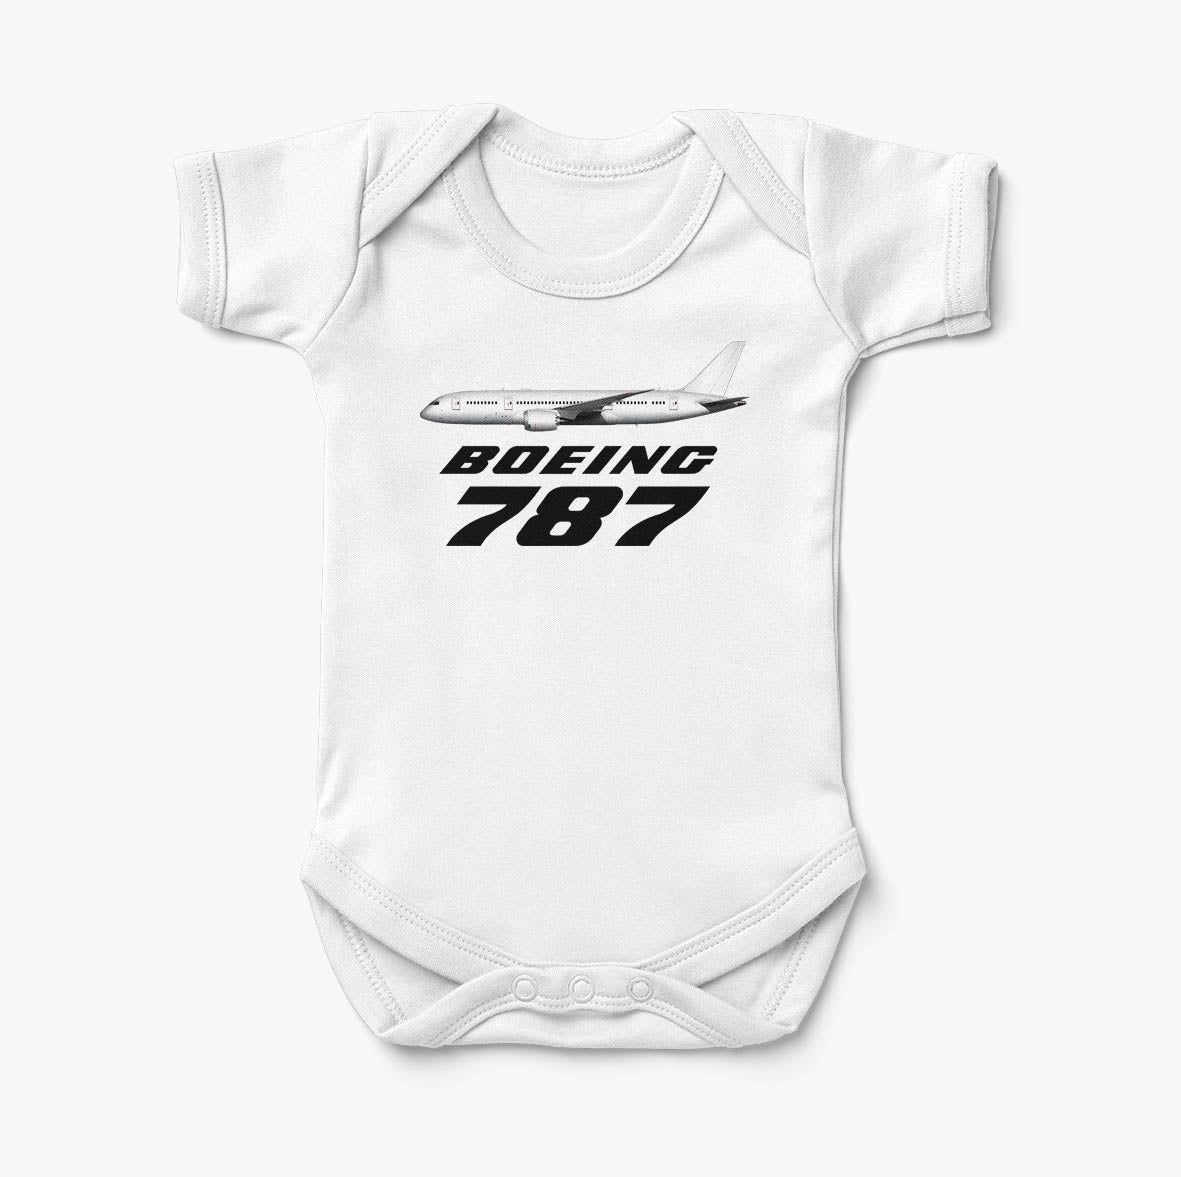 The Boeing 787 Designed Baby Bodysuits